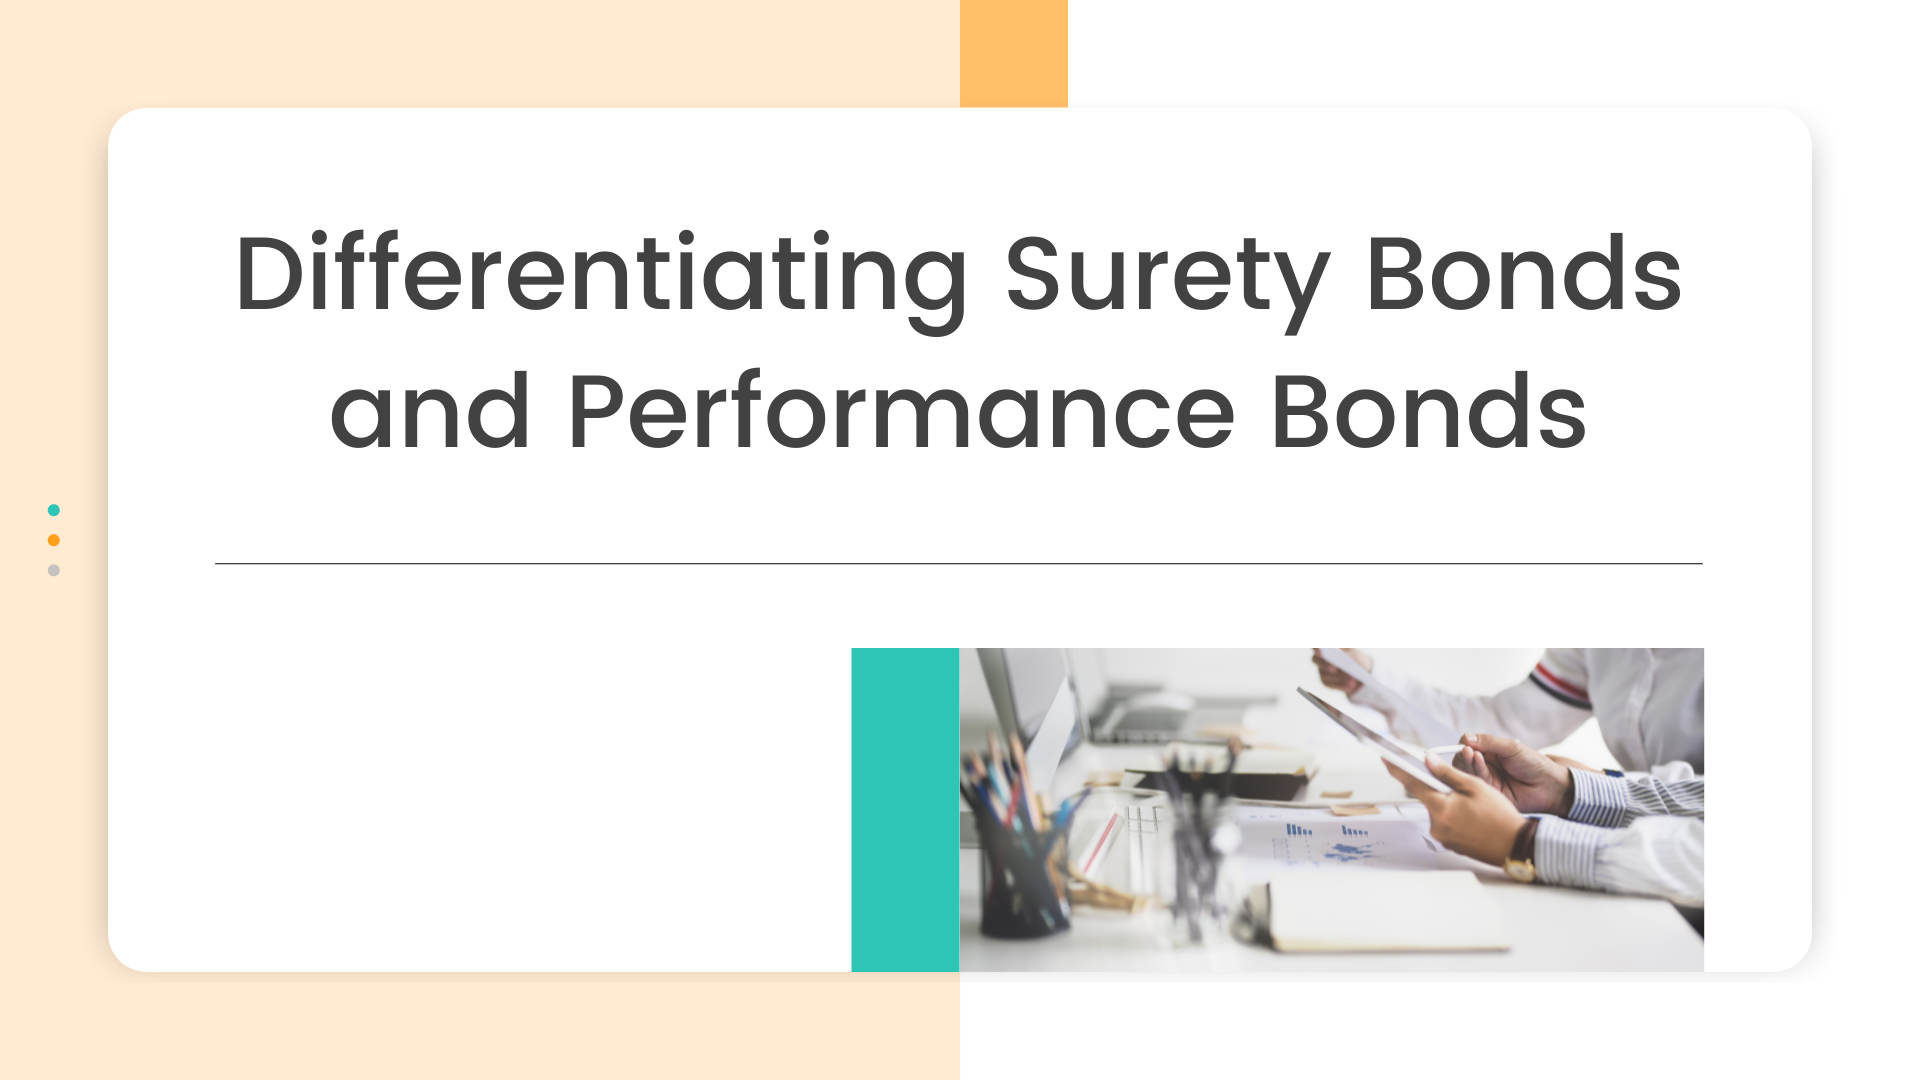 surety bond - What is the definition of a surety bond - business pitch